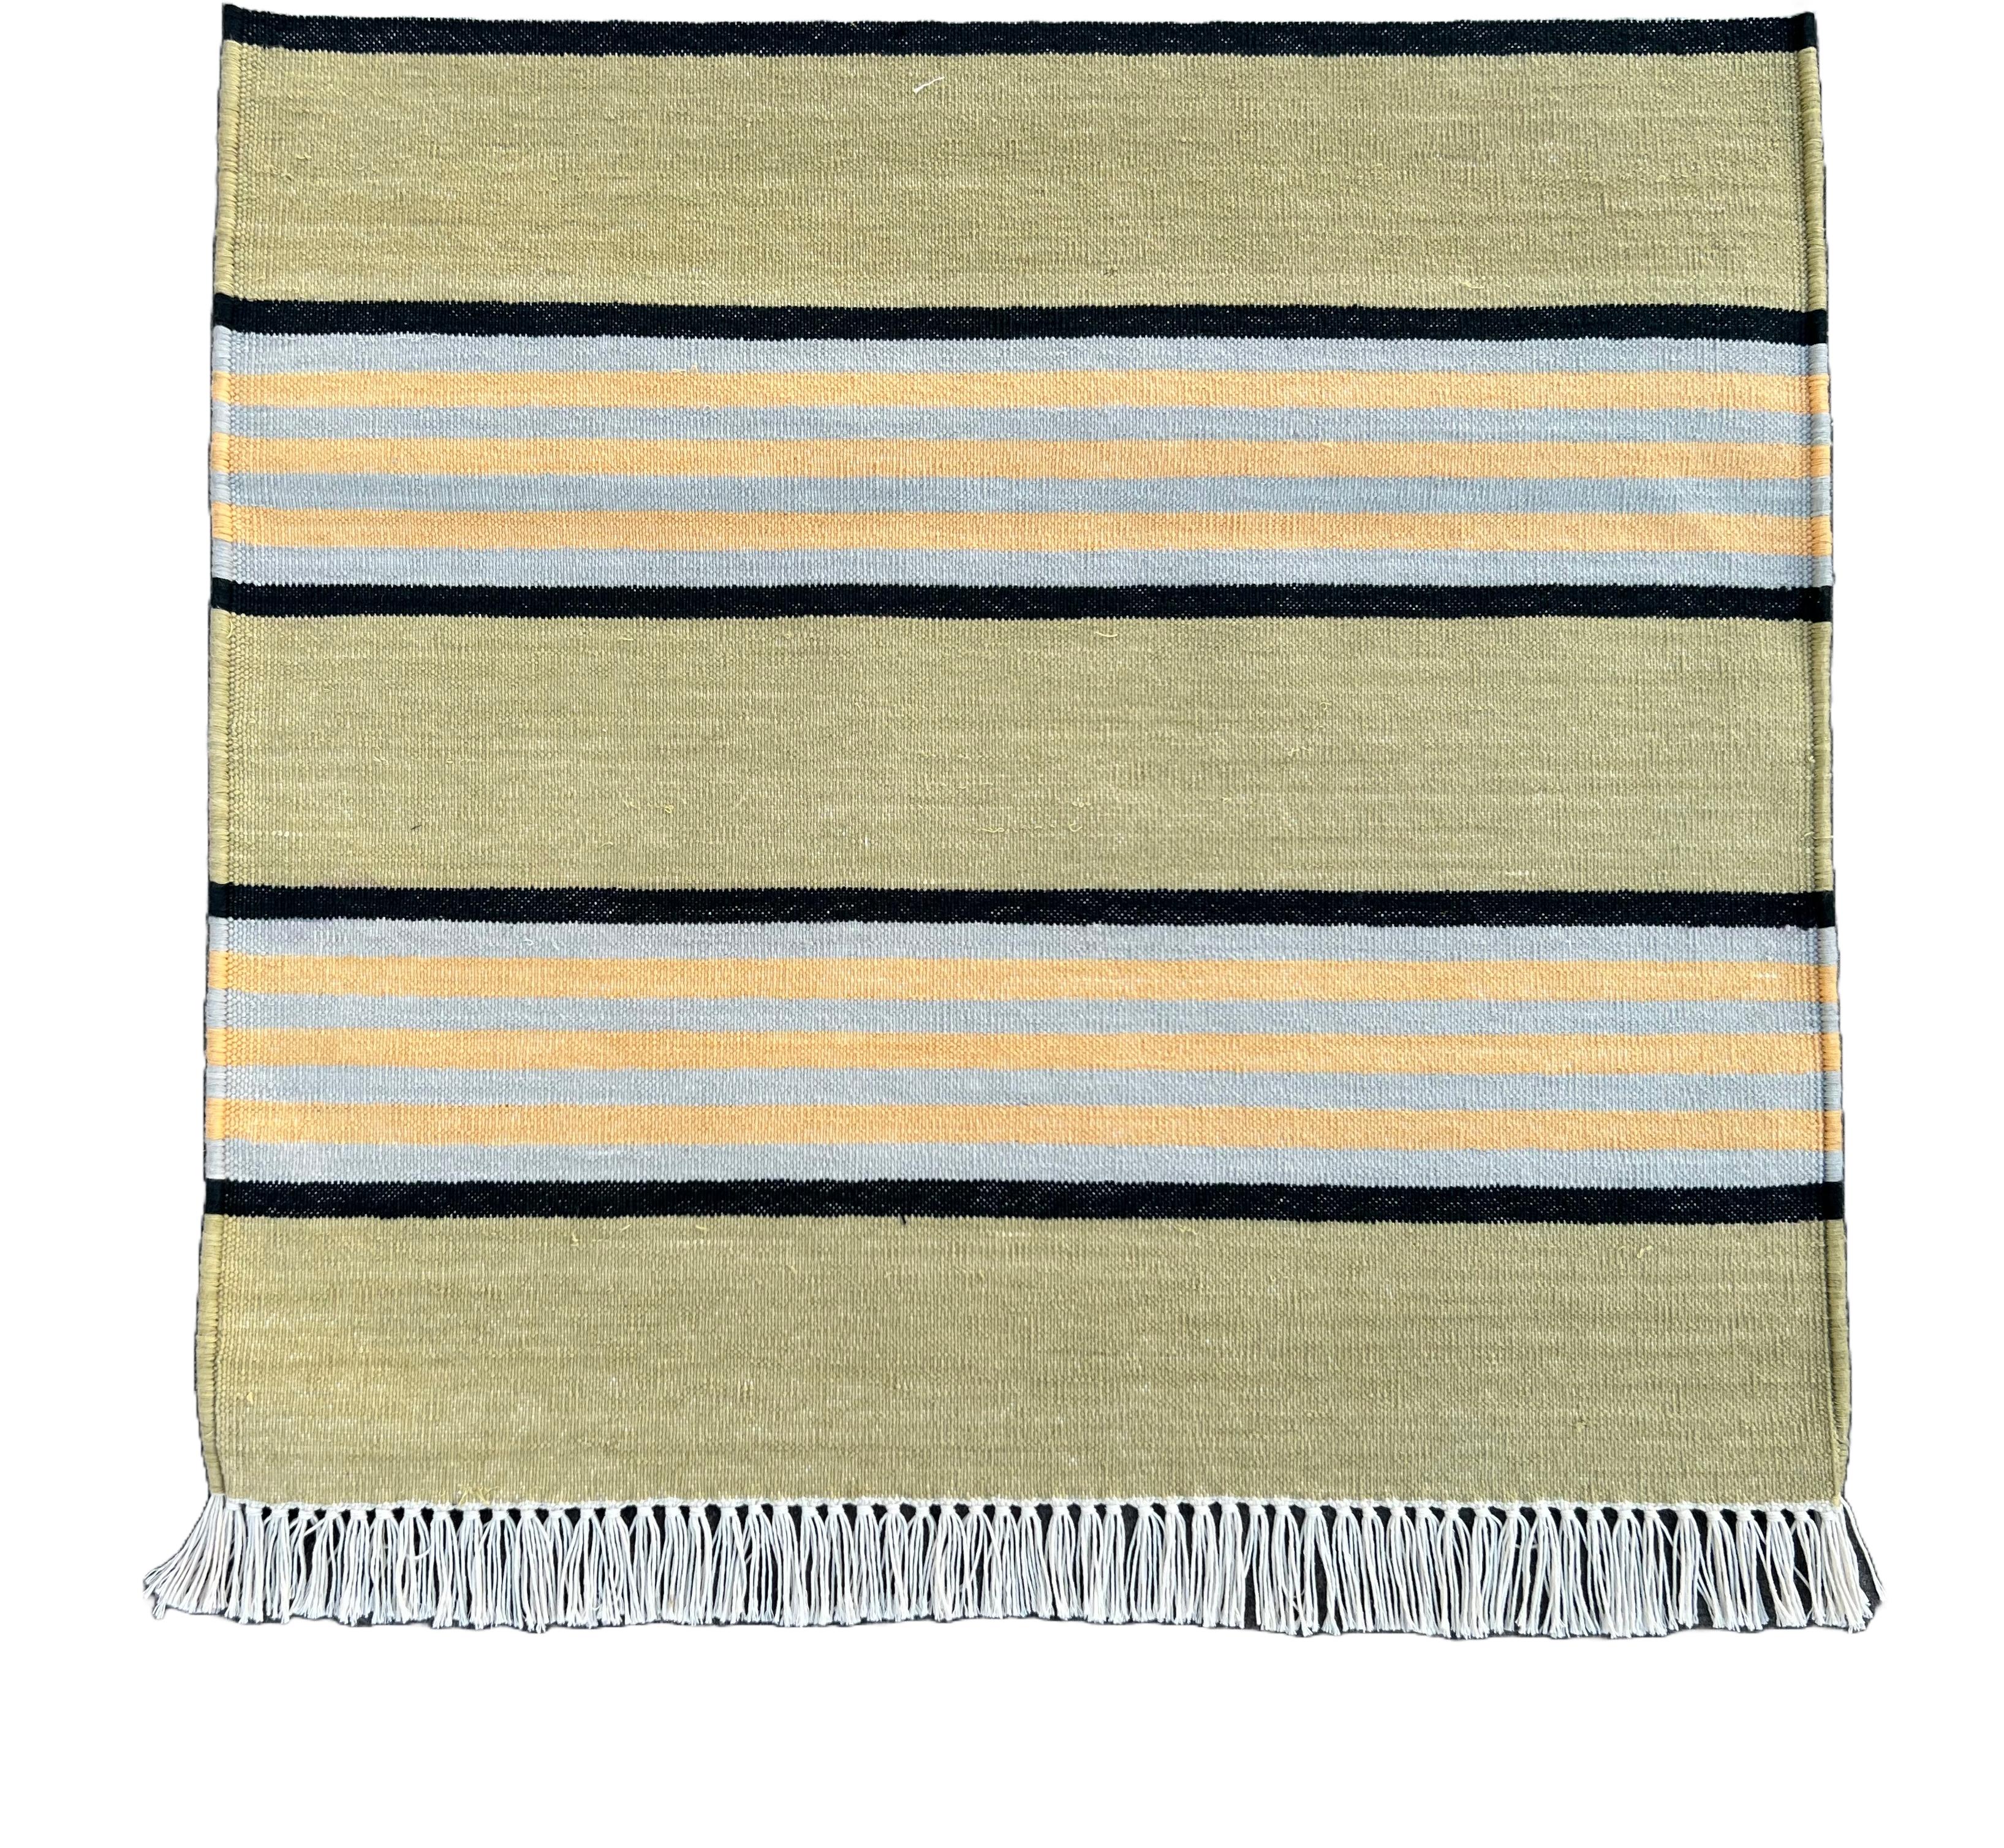 Handmade Cotton Area Flat Weave Runner, 2x10 Green, Black Striped Indian Dhurrie In New Condition For Sale In Jaipur, IN